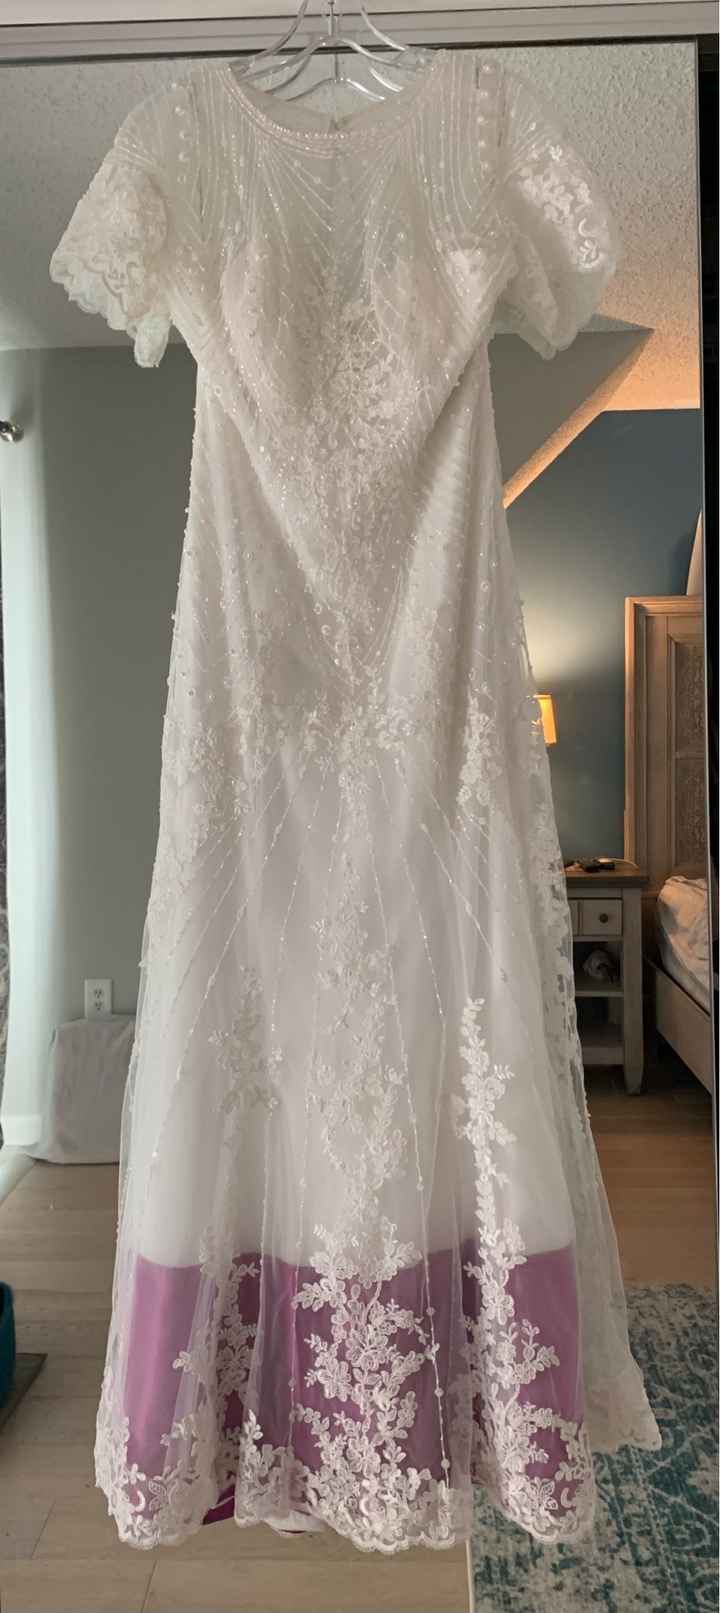 My dress is complete - 1